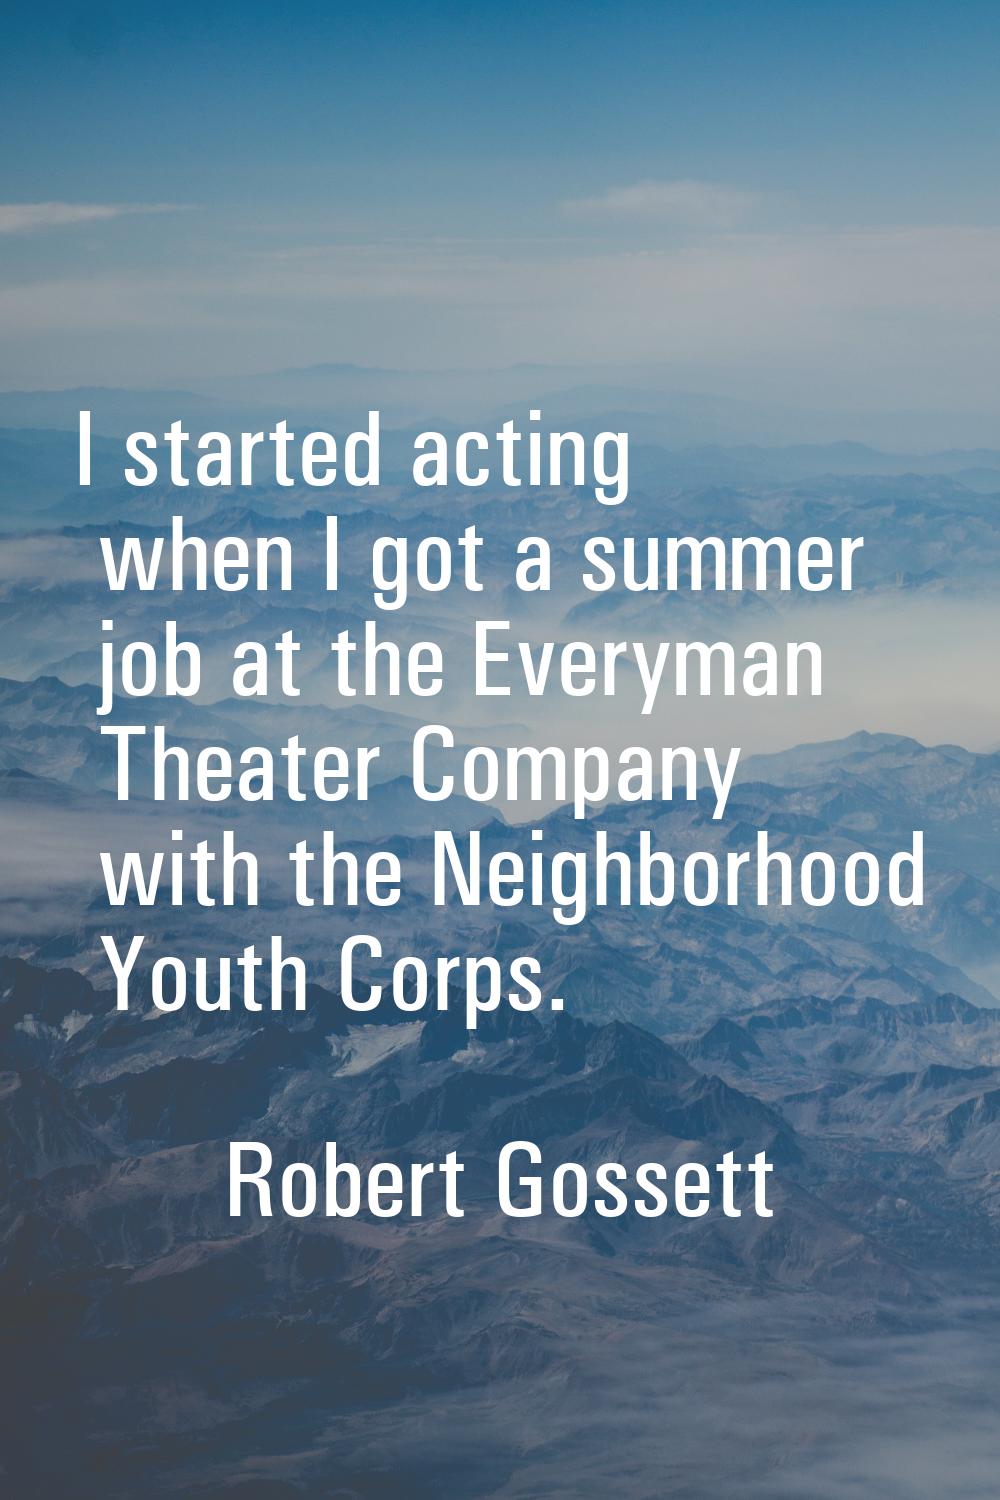 I started acting when I got a summer job at the Everyman Theater Company with the Neighborhood Yout